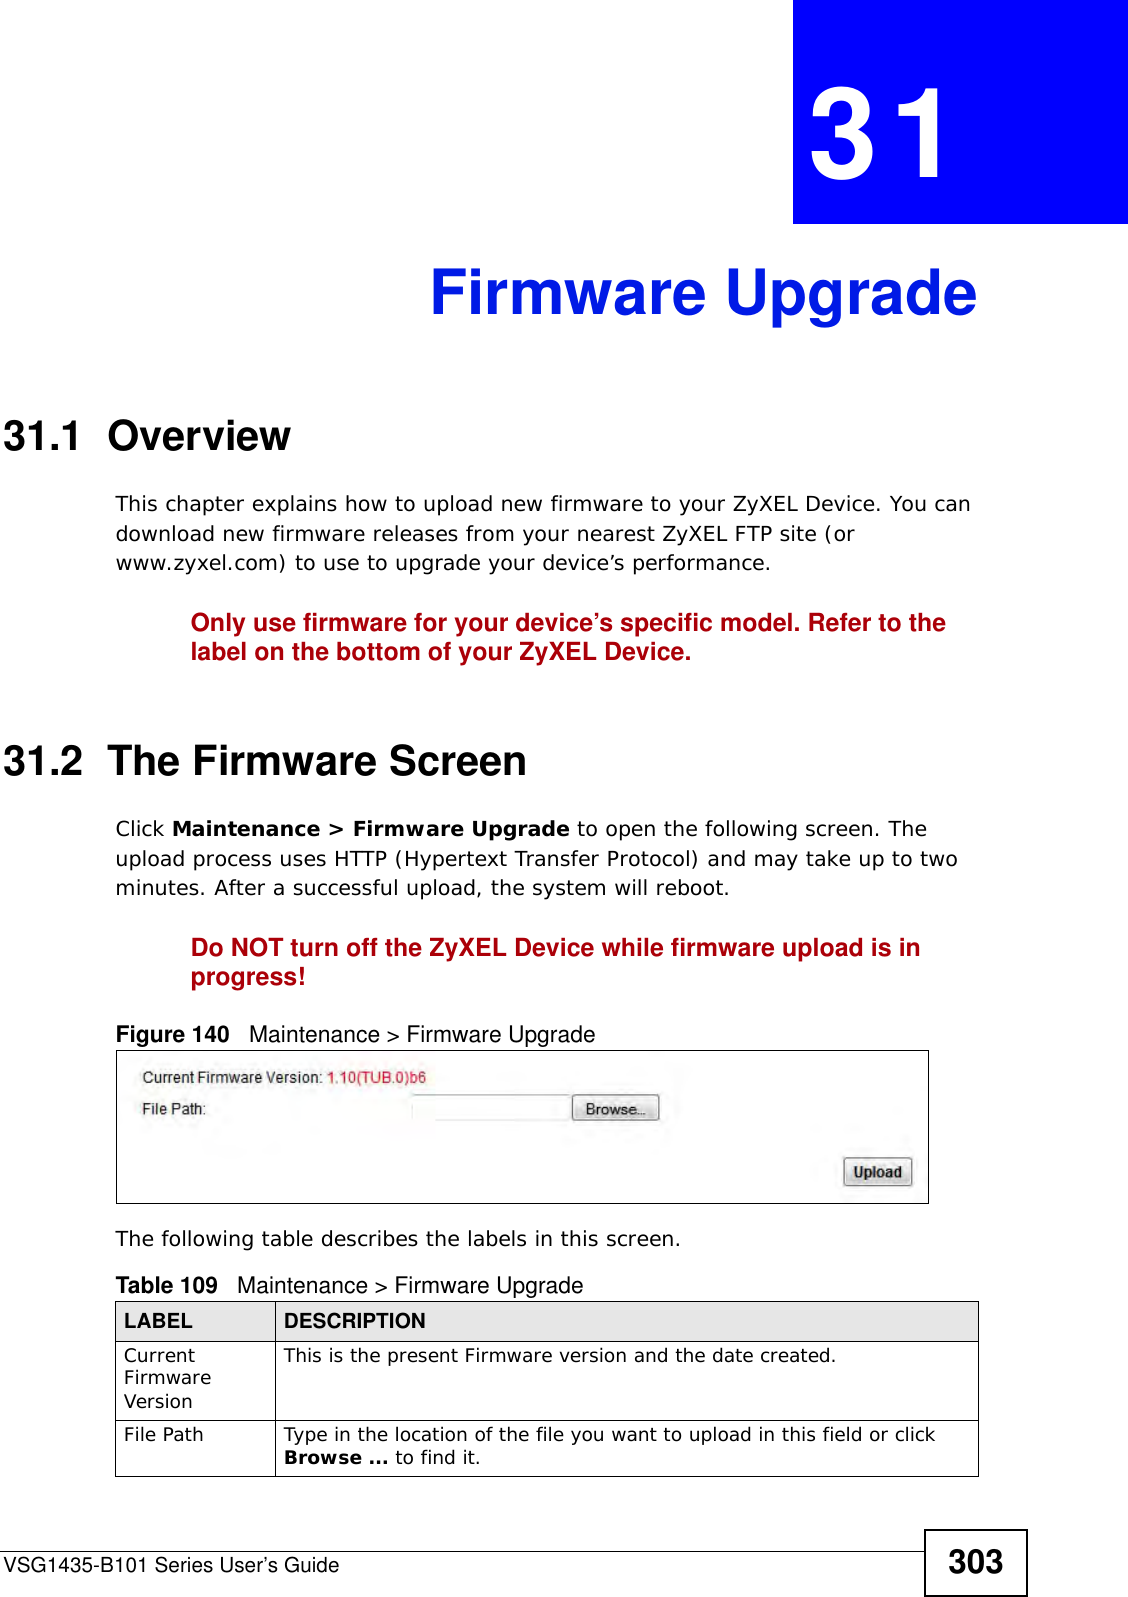 VSG1435-B101 Series User’s Guide 303CHAPTER  31 Firmware Upgrade31.1  OverviewThis chapter explains how to upload new firmware to your ZyXEL Device. You can download new firmware releases from your nearest ZyXEL FTP site (or www.zyxel.com) to use to upgrade your device’s performance.Only use firmware for your device’s specific model. Refer to the label on the bottom of your ZyXEL Device.31.2  The Firmware ScreenClick Maintenance &gt; Firmware Upgrade to open the following screen. The upload process uses HTTP (Hypertext Transfer Protocol) and may take up to two minutes. After a successful upload, the system will reboot. Do NOT turn off the ZyXEL Device while firmware upload is in progress!Figure 140   Maintenance &gt; Firmware UpgradeThe following table describes the labels in this screen. Table 109   Maintenance &gt; Firmware UpgradeLABEL DESCRIPTIONCurrent Firmware VersionThis is the present Firmware version and the date created. File Path Type in the location of the file you want to upload in this field or click Browse ... to find it.